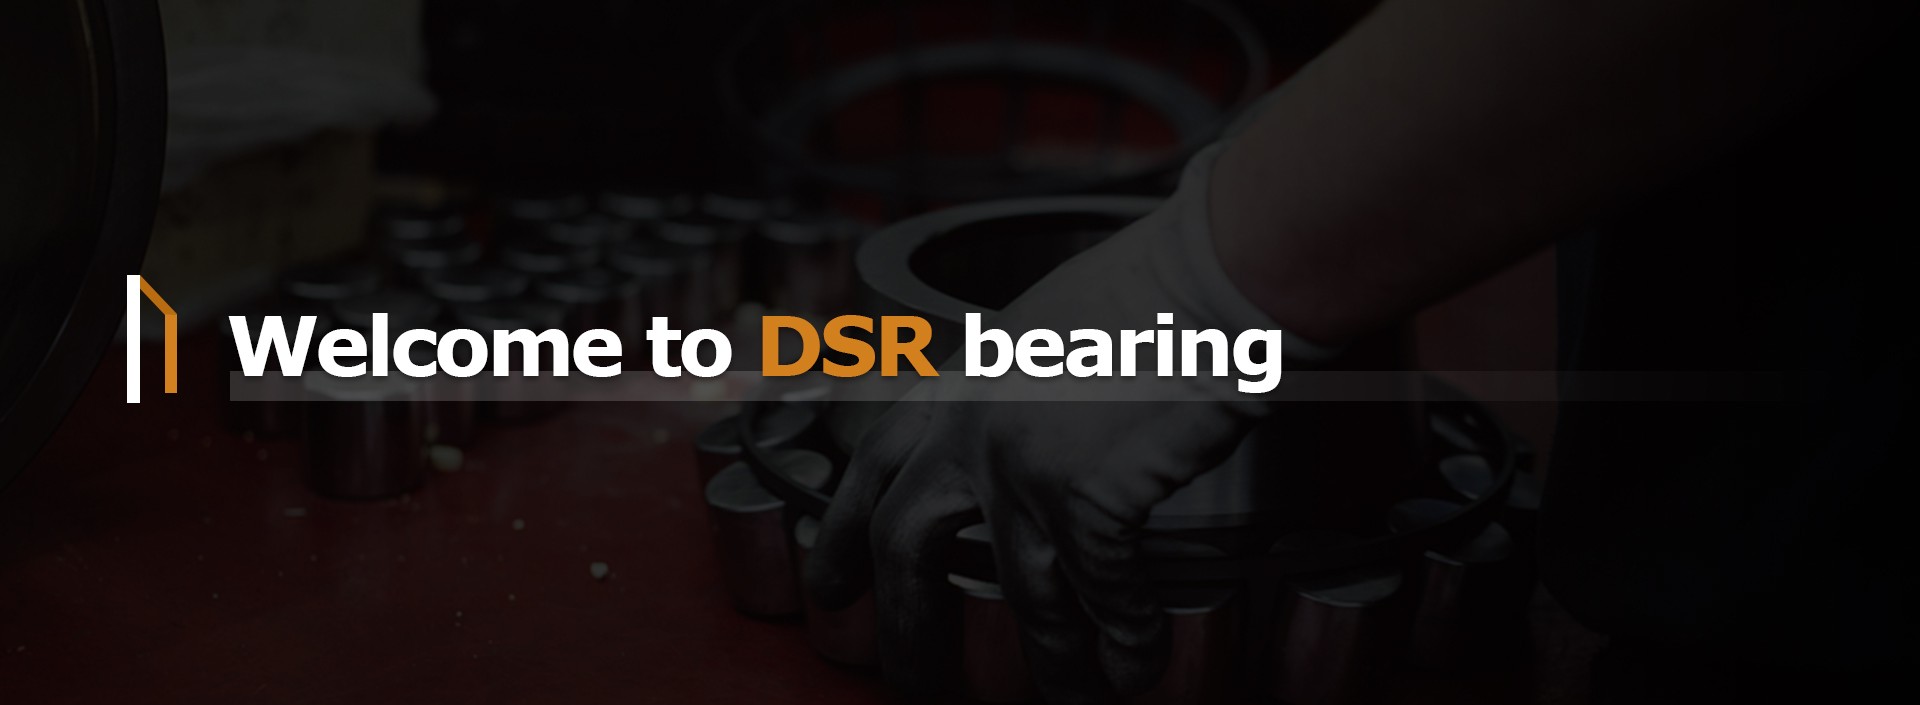 Welocme to DSR bearing